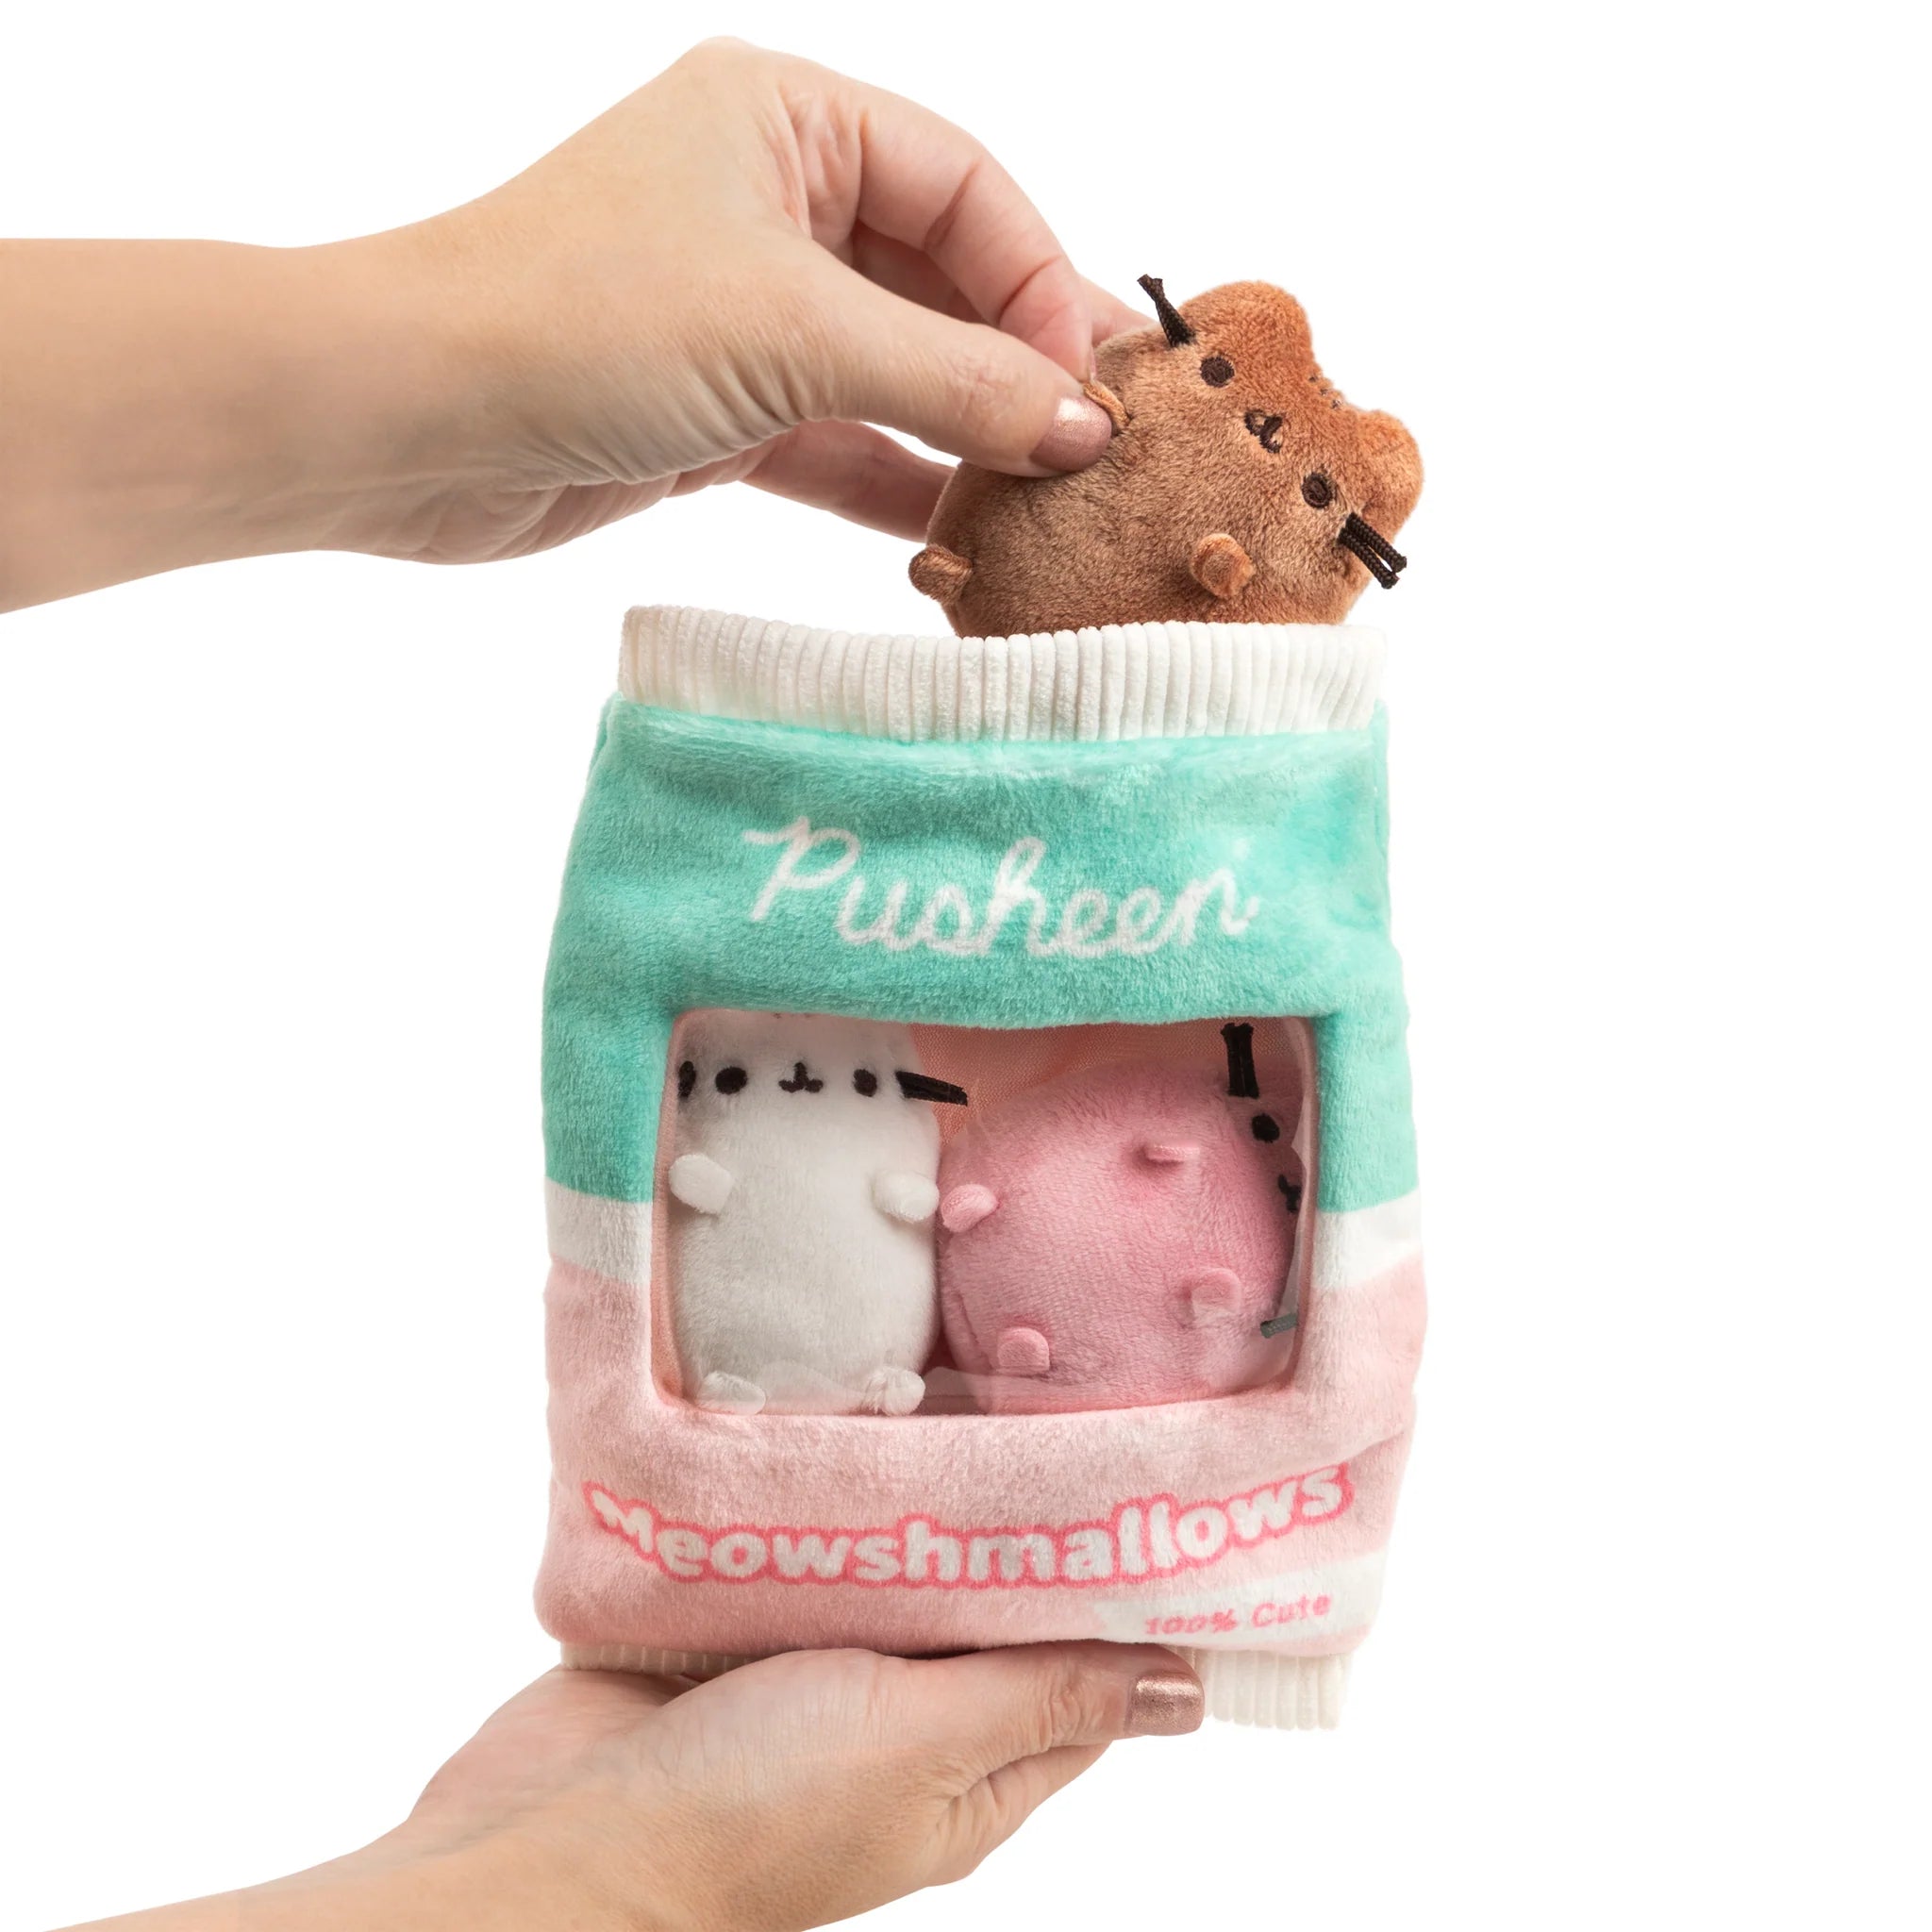 Pusheen Meowshmallows With Removable Mini Plush by Gund #6065082